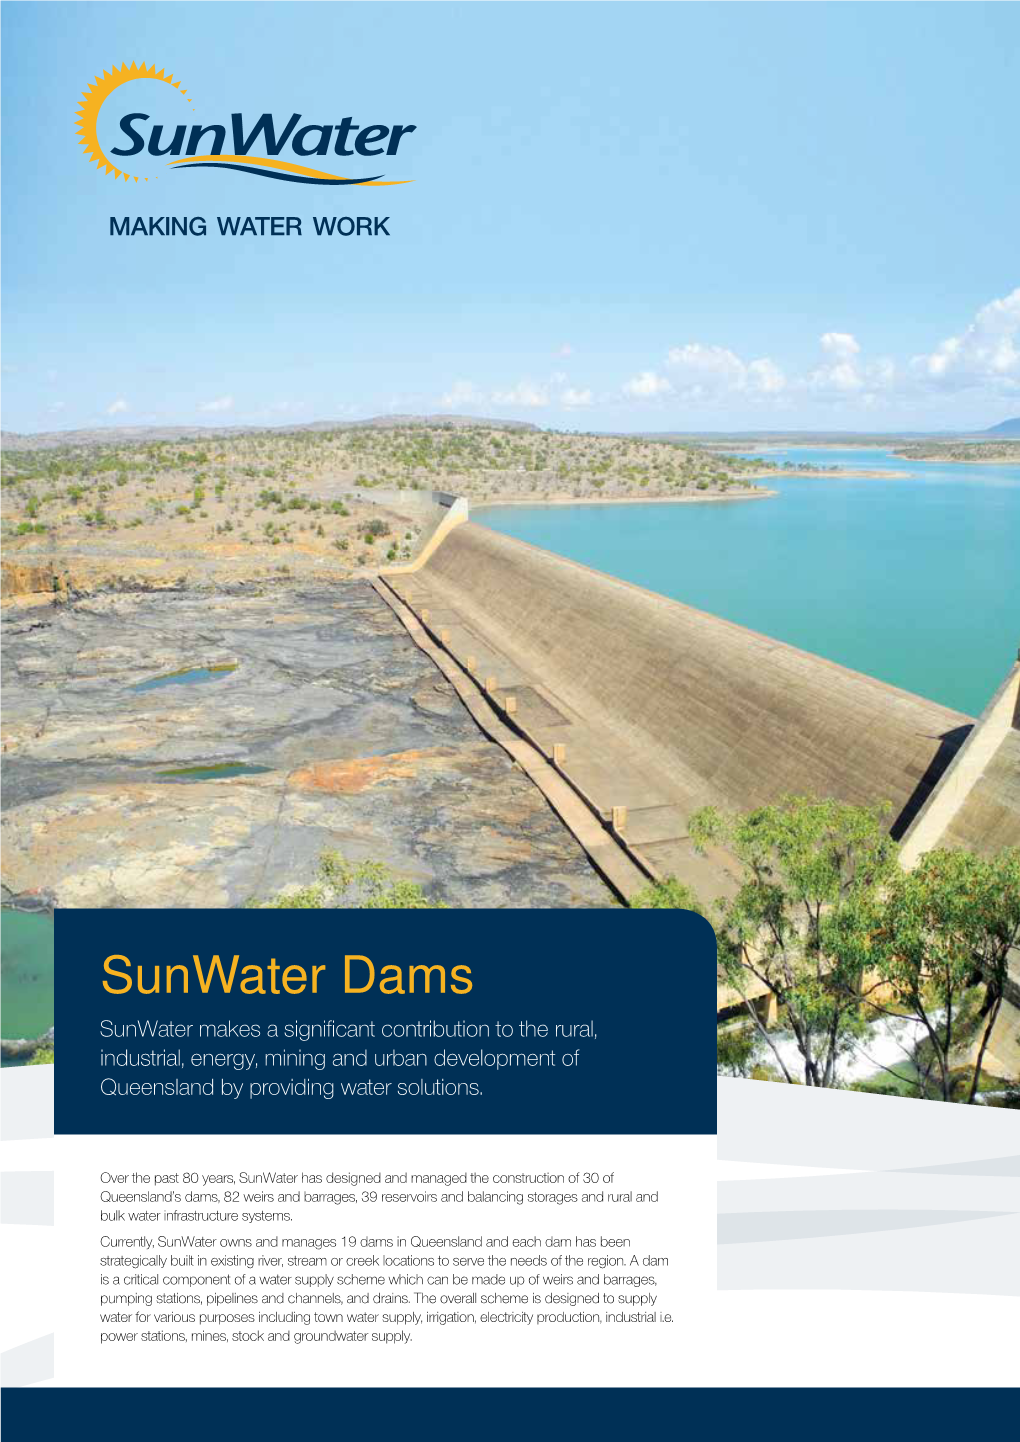 Sunwater Dams Sunwater Makes a Significant Contribution to the Rural, Industrial, Energy, Mining and Urban Development of Queensland by Providing Water Solutions